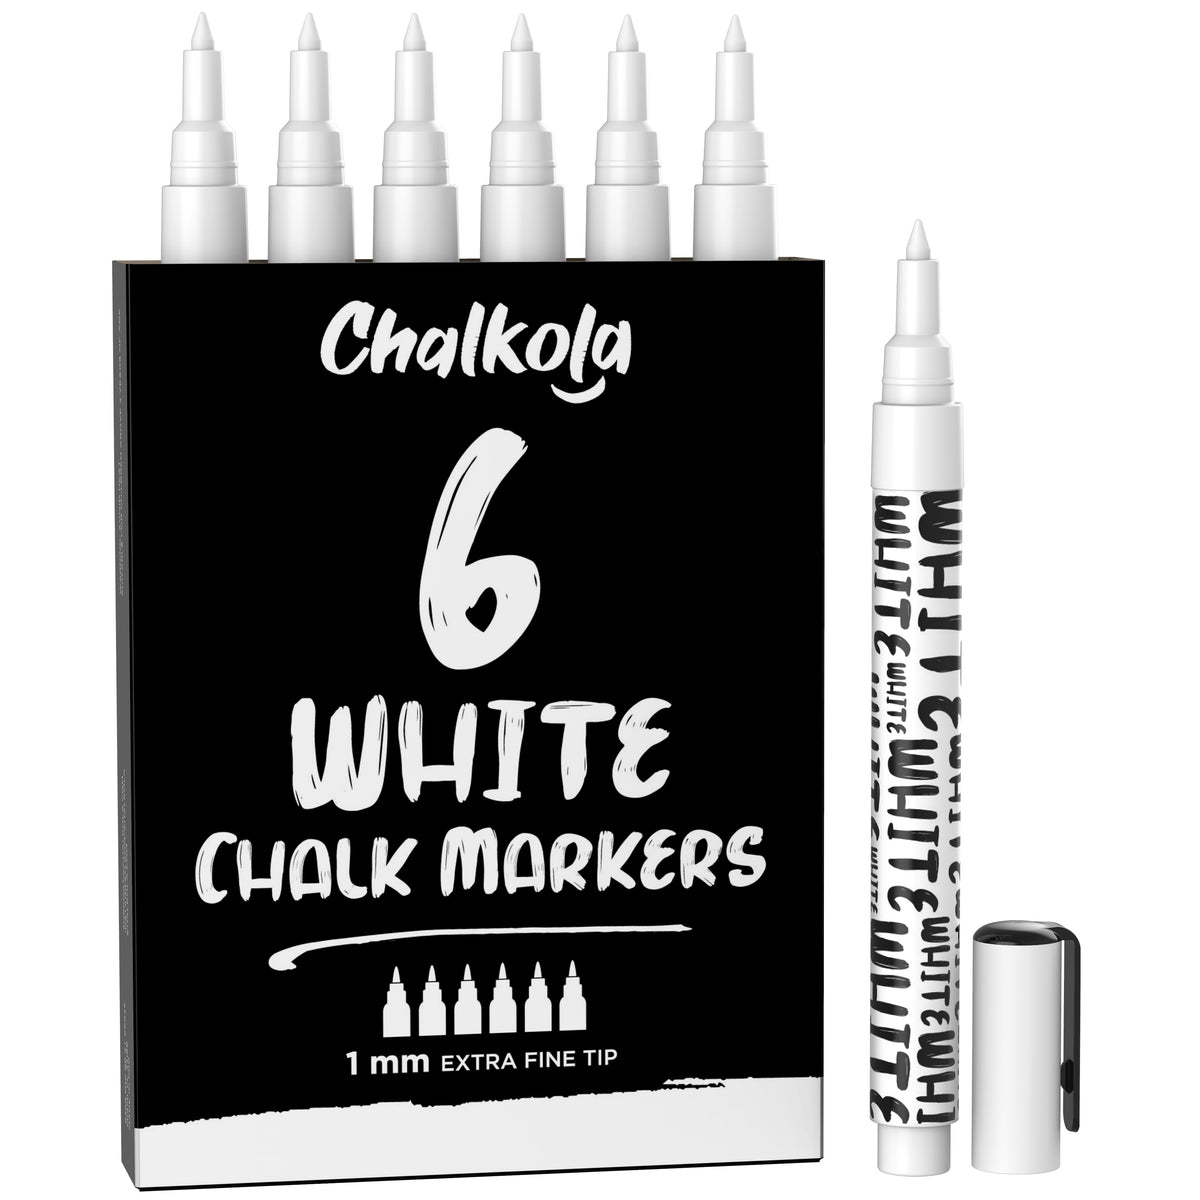 AKARUED 6 White Window Markers for Glass Washable: White Chalk Marker Pen  (Different Sizes 1, 3, 6, 10, 15mm Tips) with 45 Labels, Liquid chalkboard